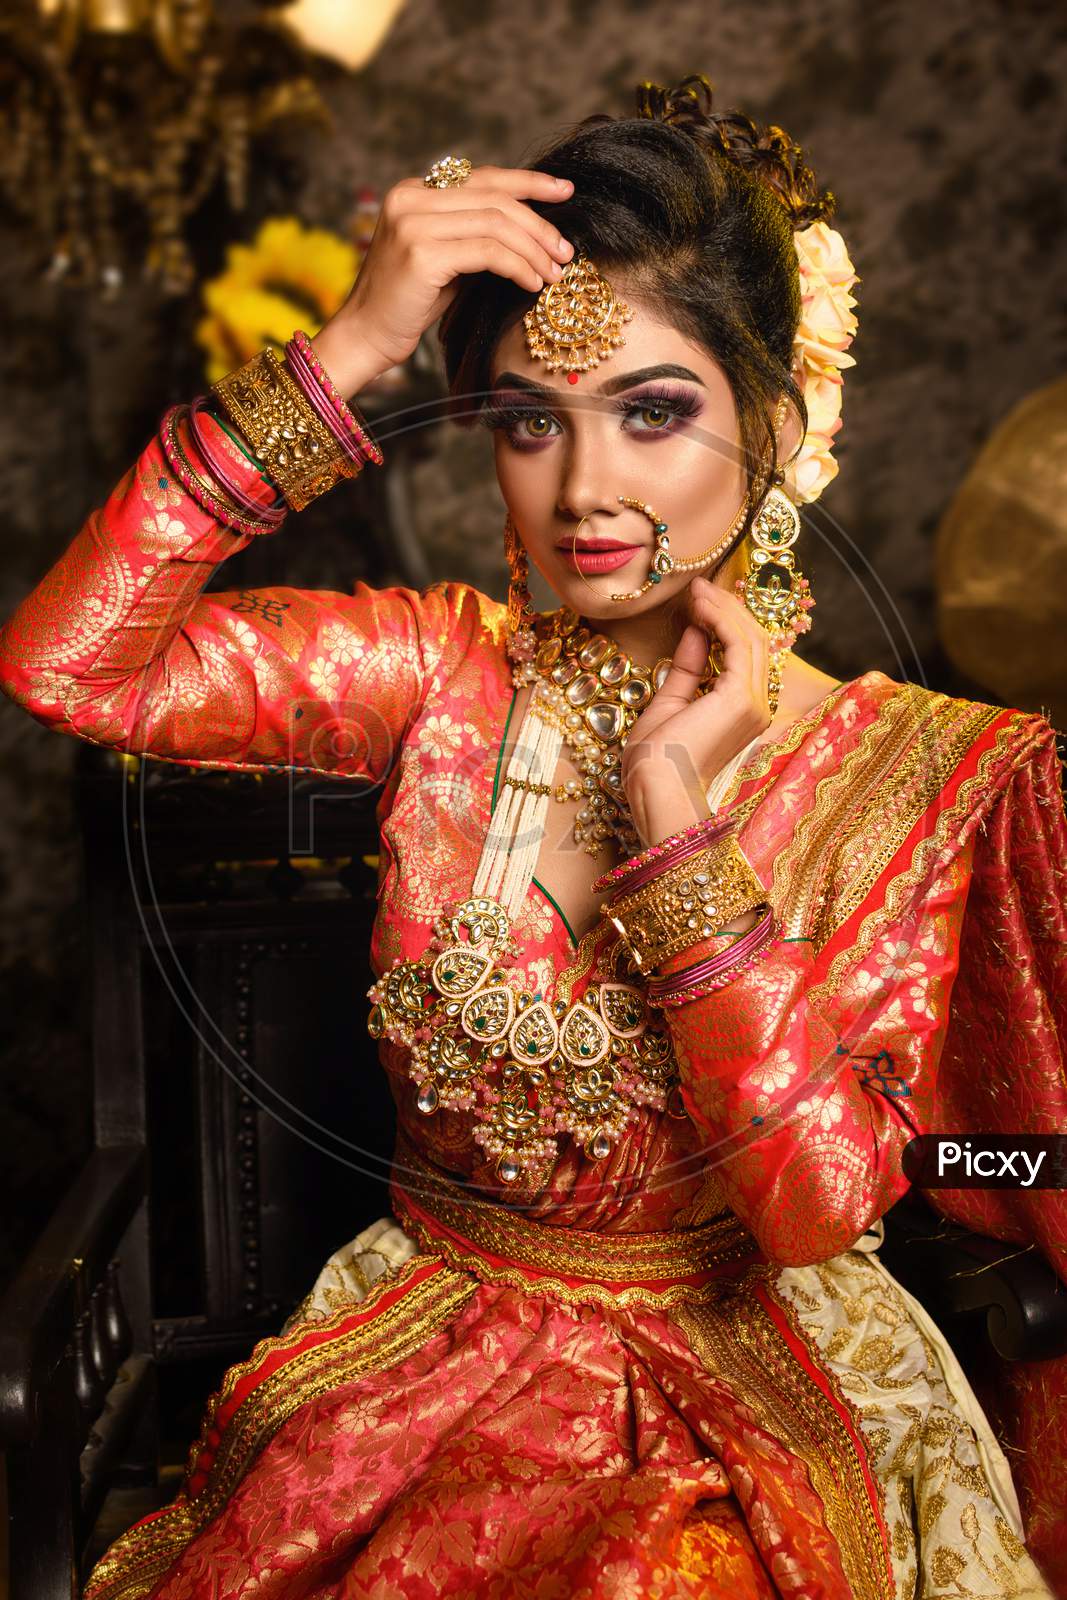 Magnificent Young Indian Bride In Luxurious Bridal Costume With Makeup And Heavy Jewellery Is Sitting In A Chair In With Classic Vintage Interior In Studio Lighting. Wedding Fashion.